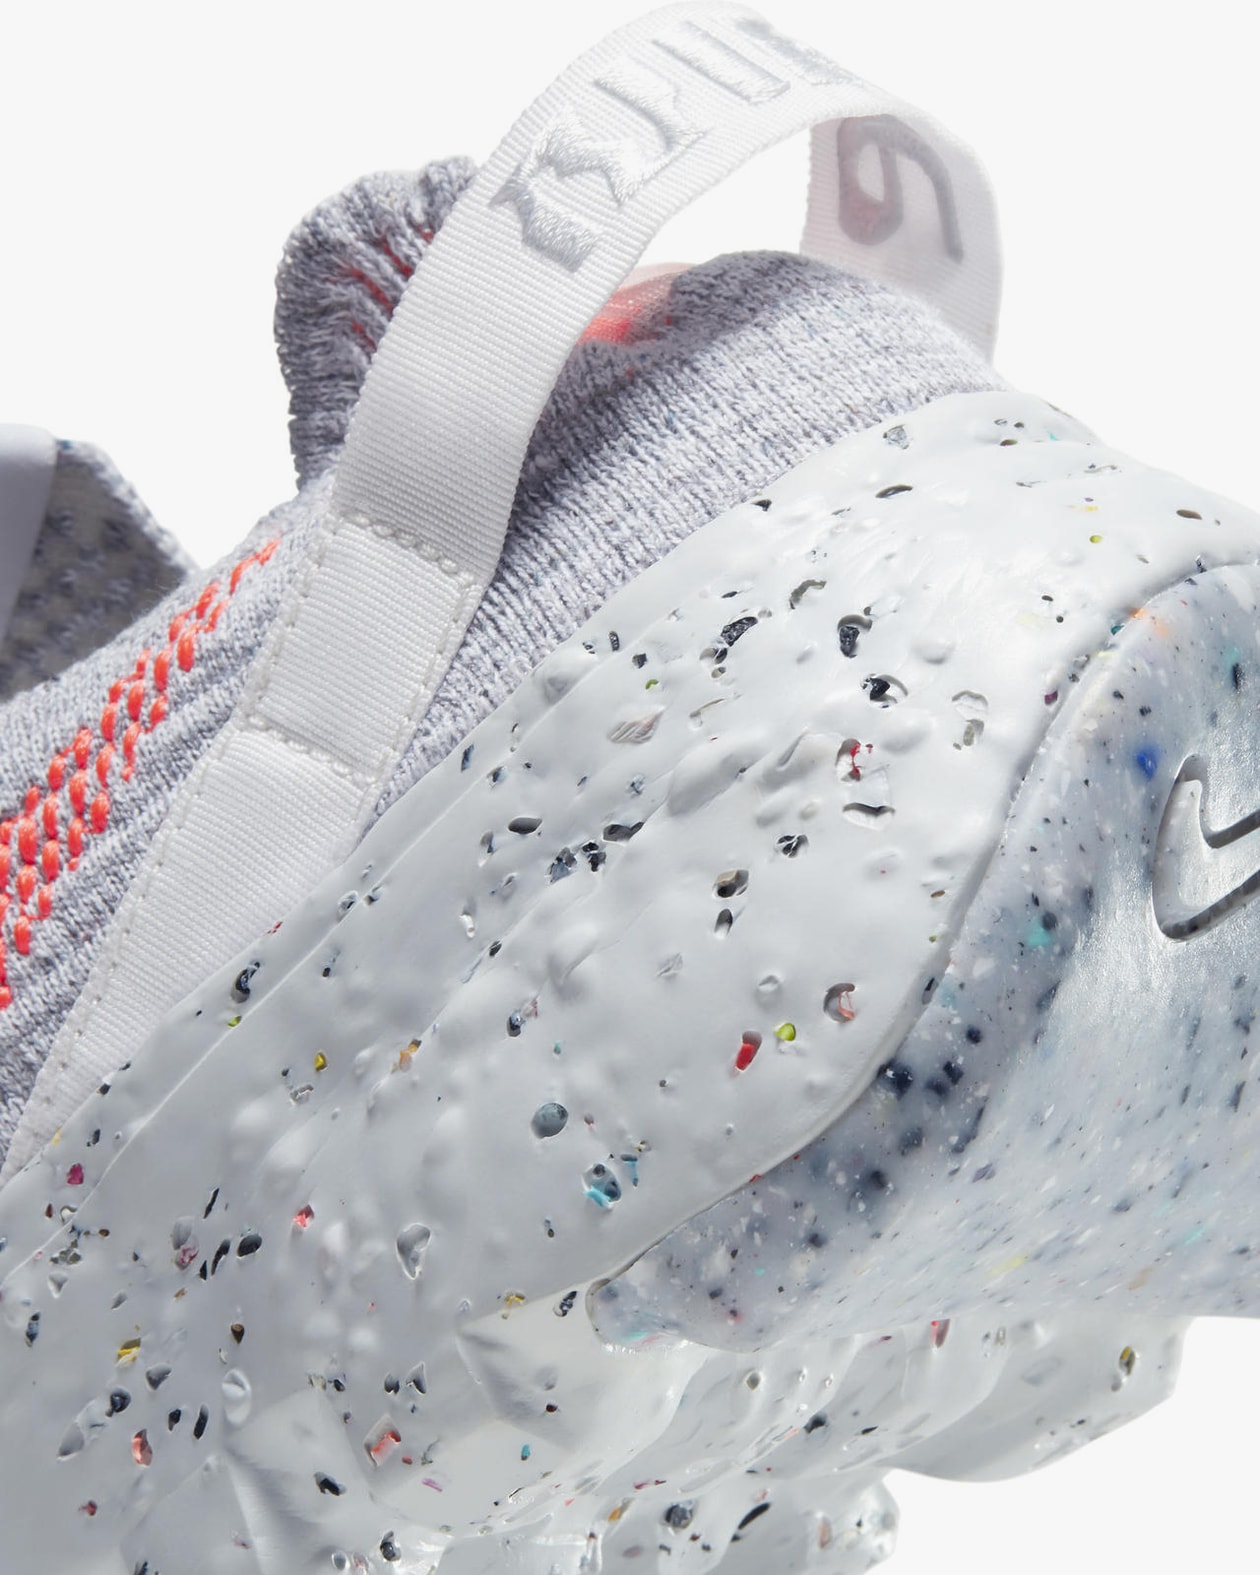 Nike Space Hippie 01, 02, 03 & 04 Official Release Info | Hypebeast